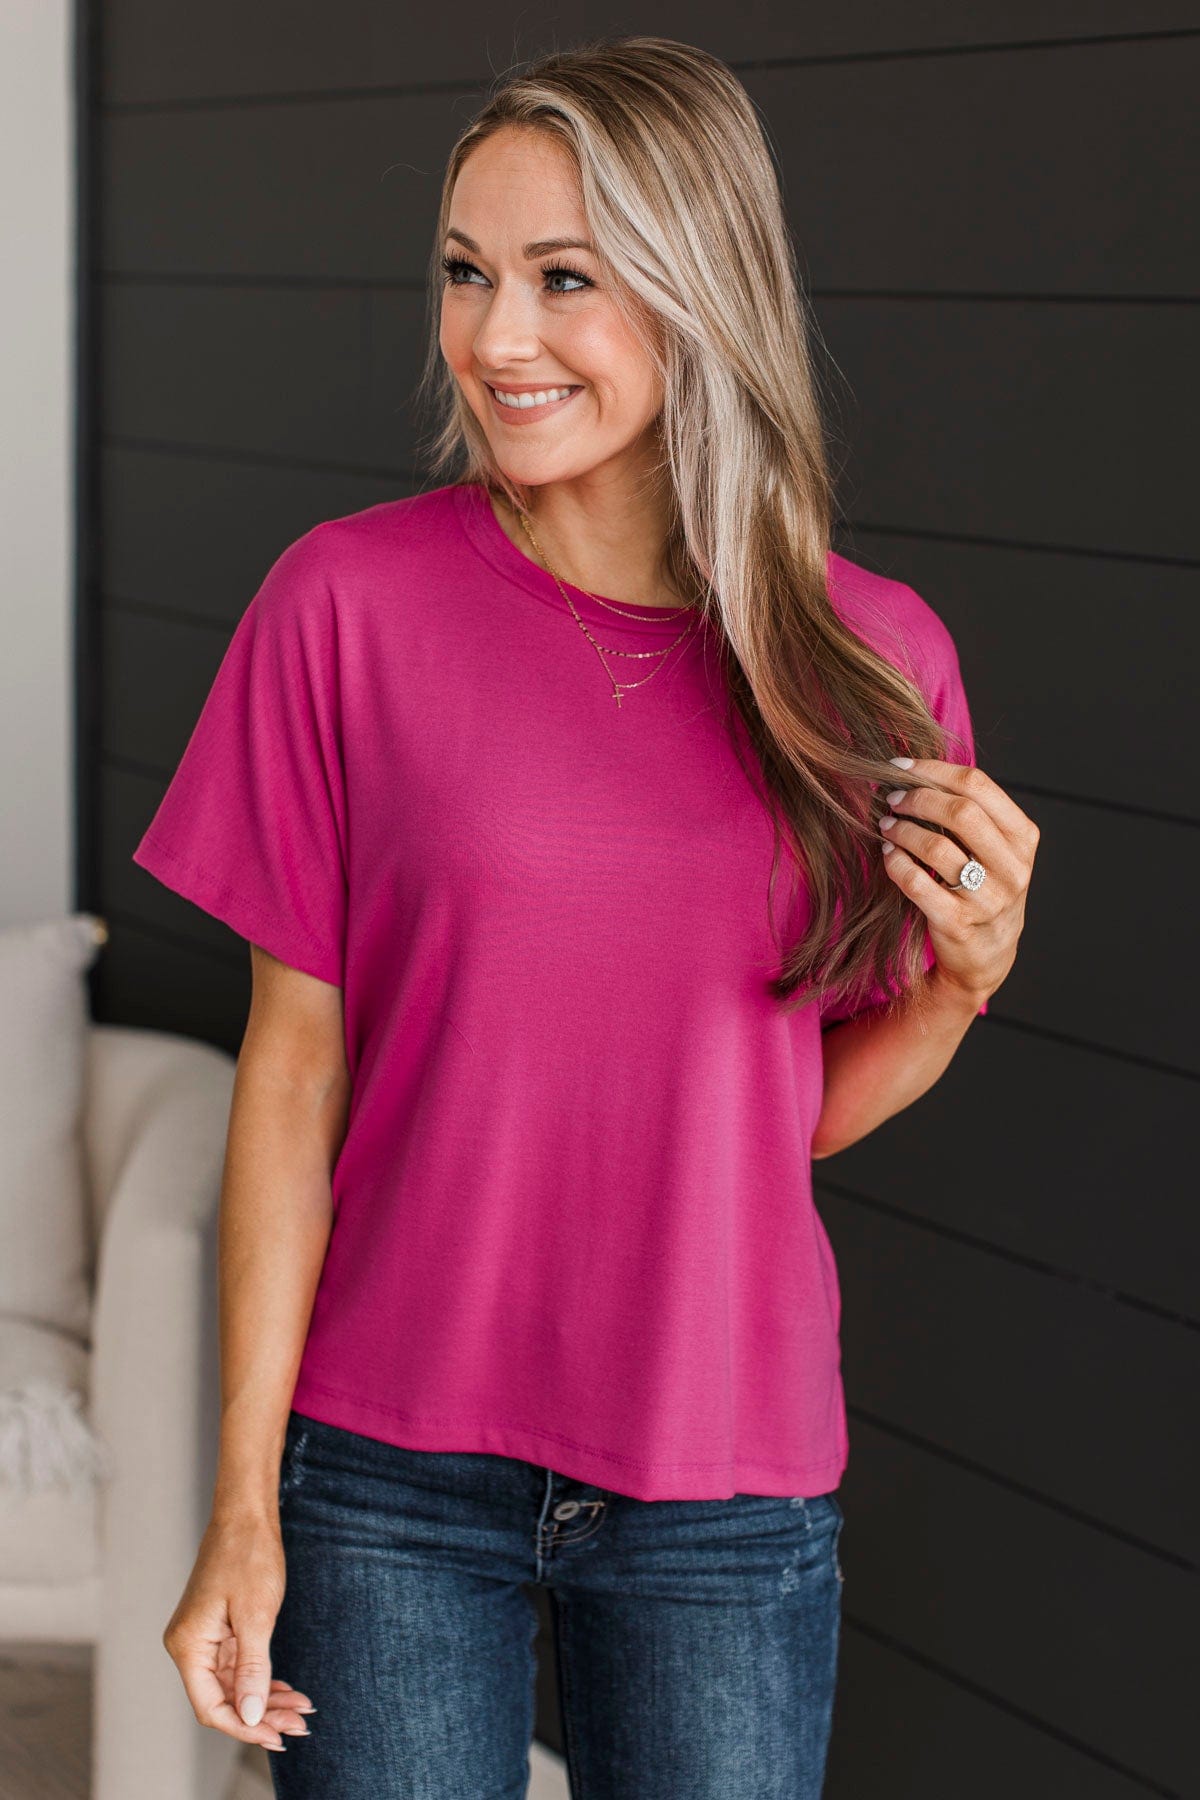 In Plain View Knit Top- Hot Pink